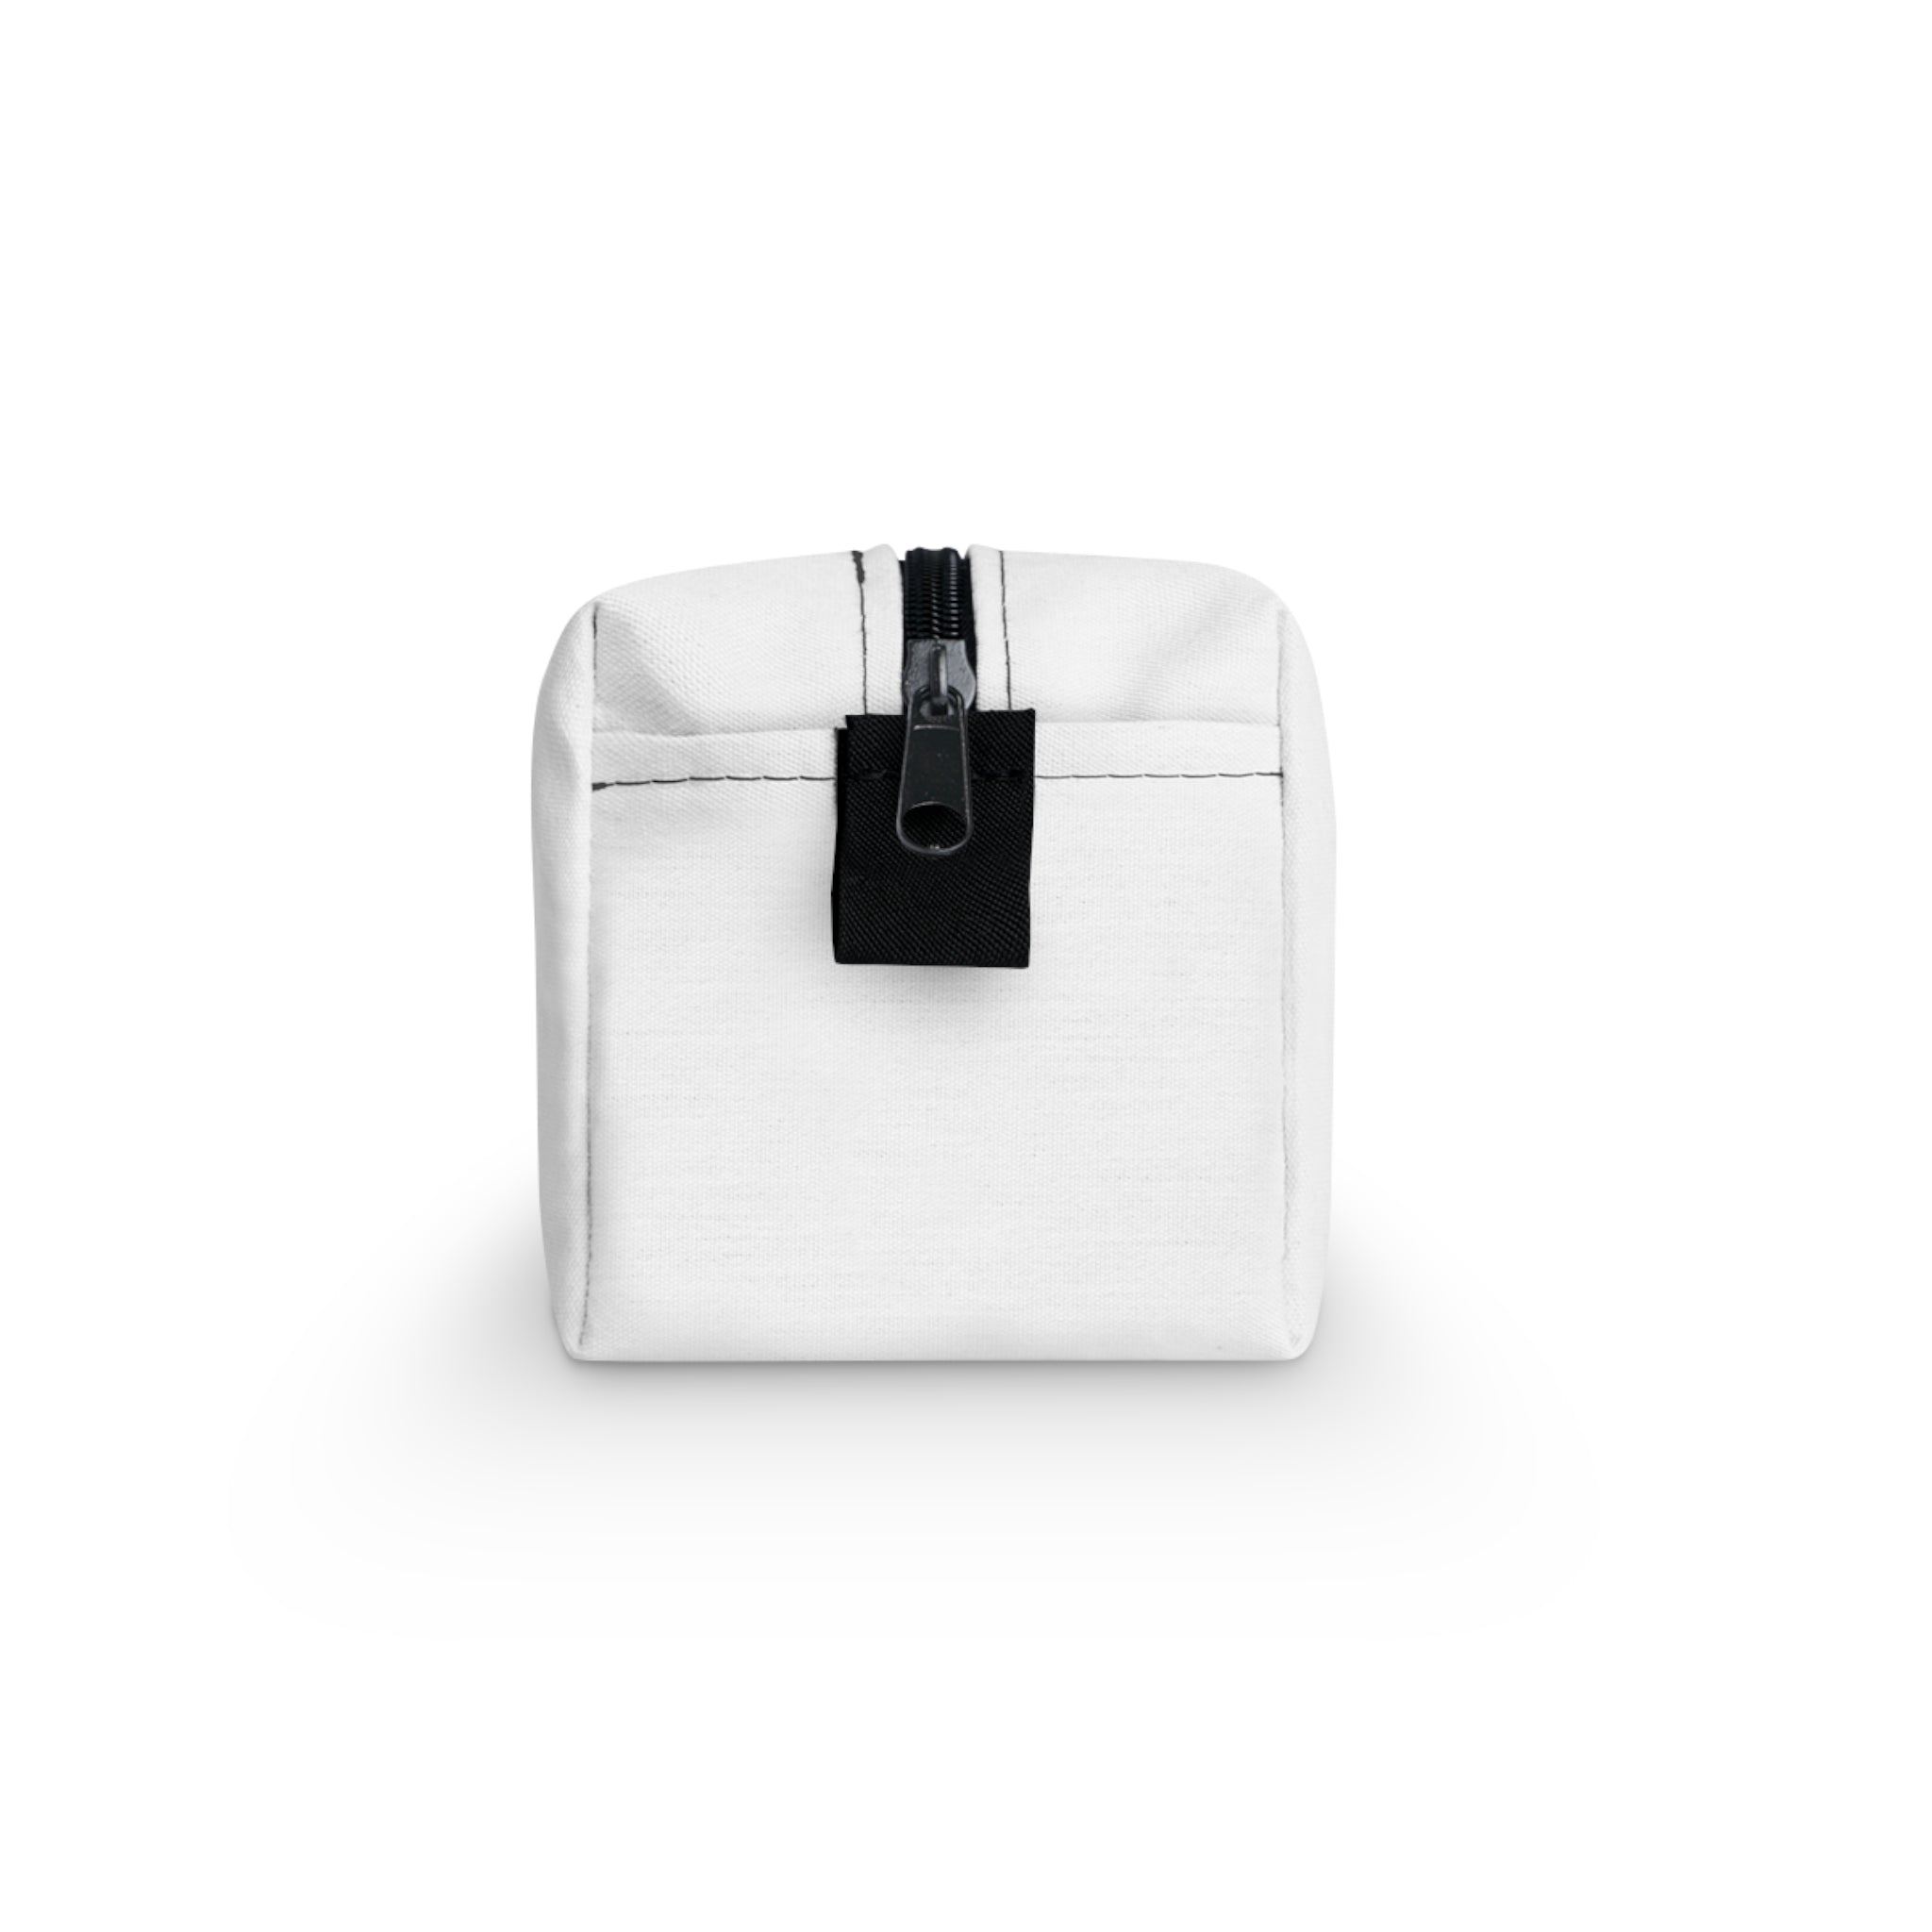 Mrs. Toiletry Pouch (White)